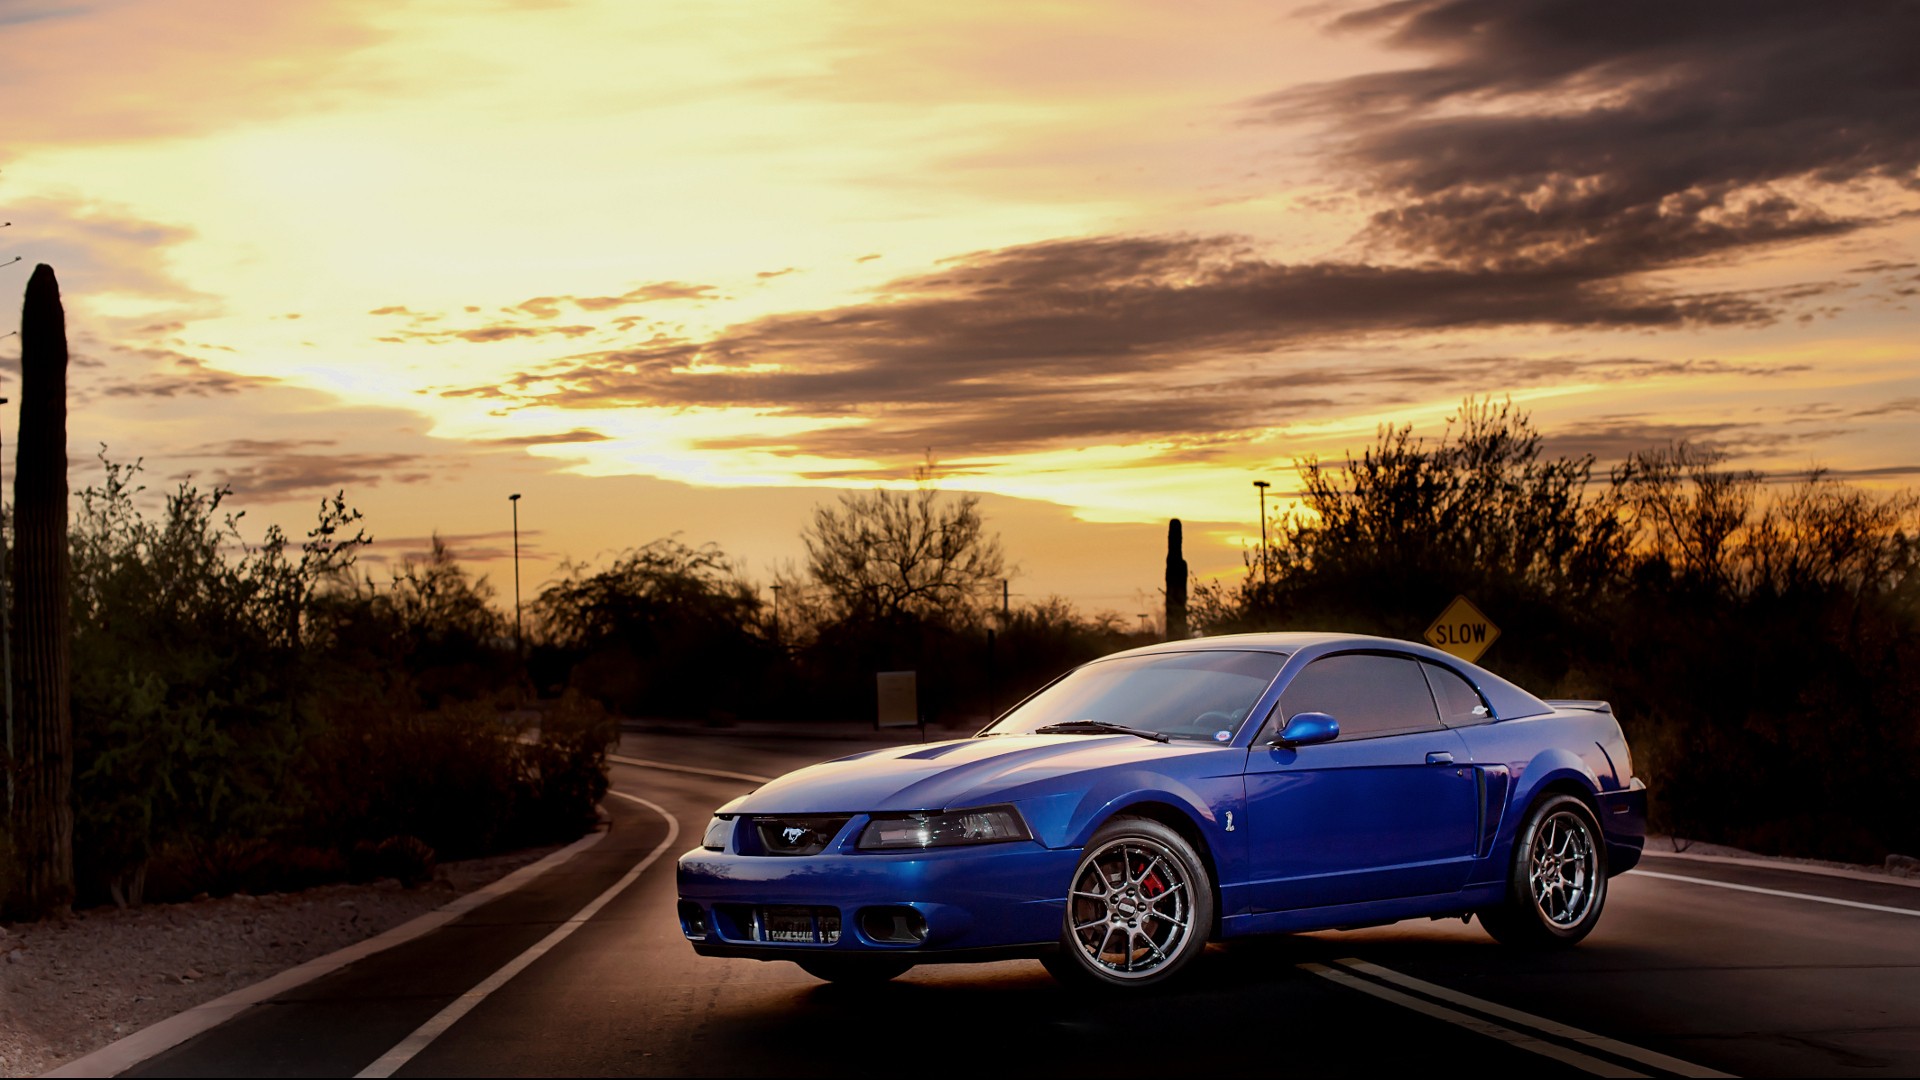 Free Download Terminator Cars Cobra Ford Vehicles Ford Mustang Ford Mustang Gt 1920x1080 For Your Desktop Mobile Tablet Explore 50 Cobra Terminator Wallpaper Mustang Iphone Wallpaper Mustang Cobra Wallpaper